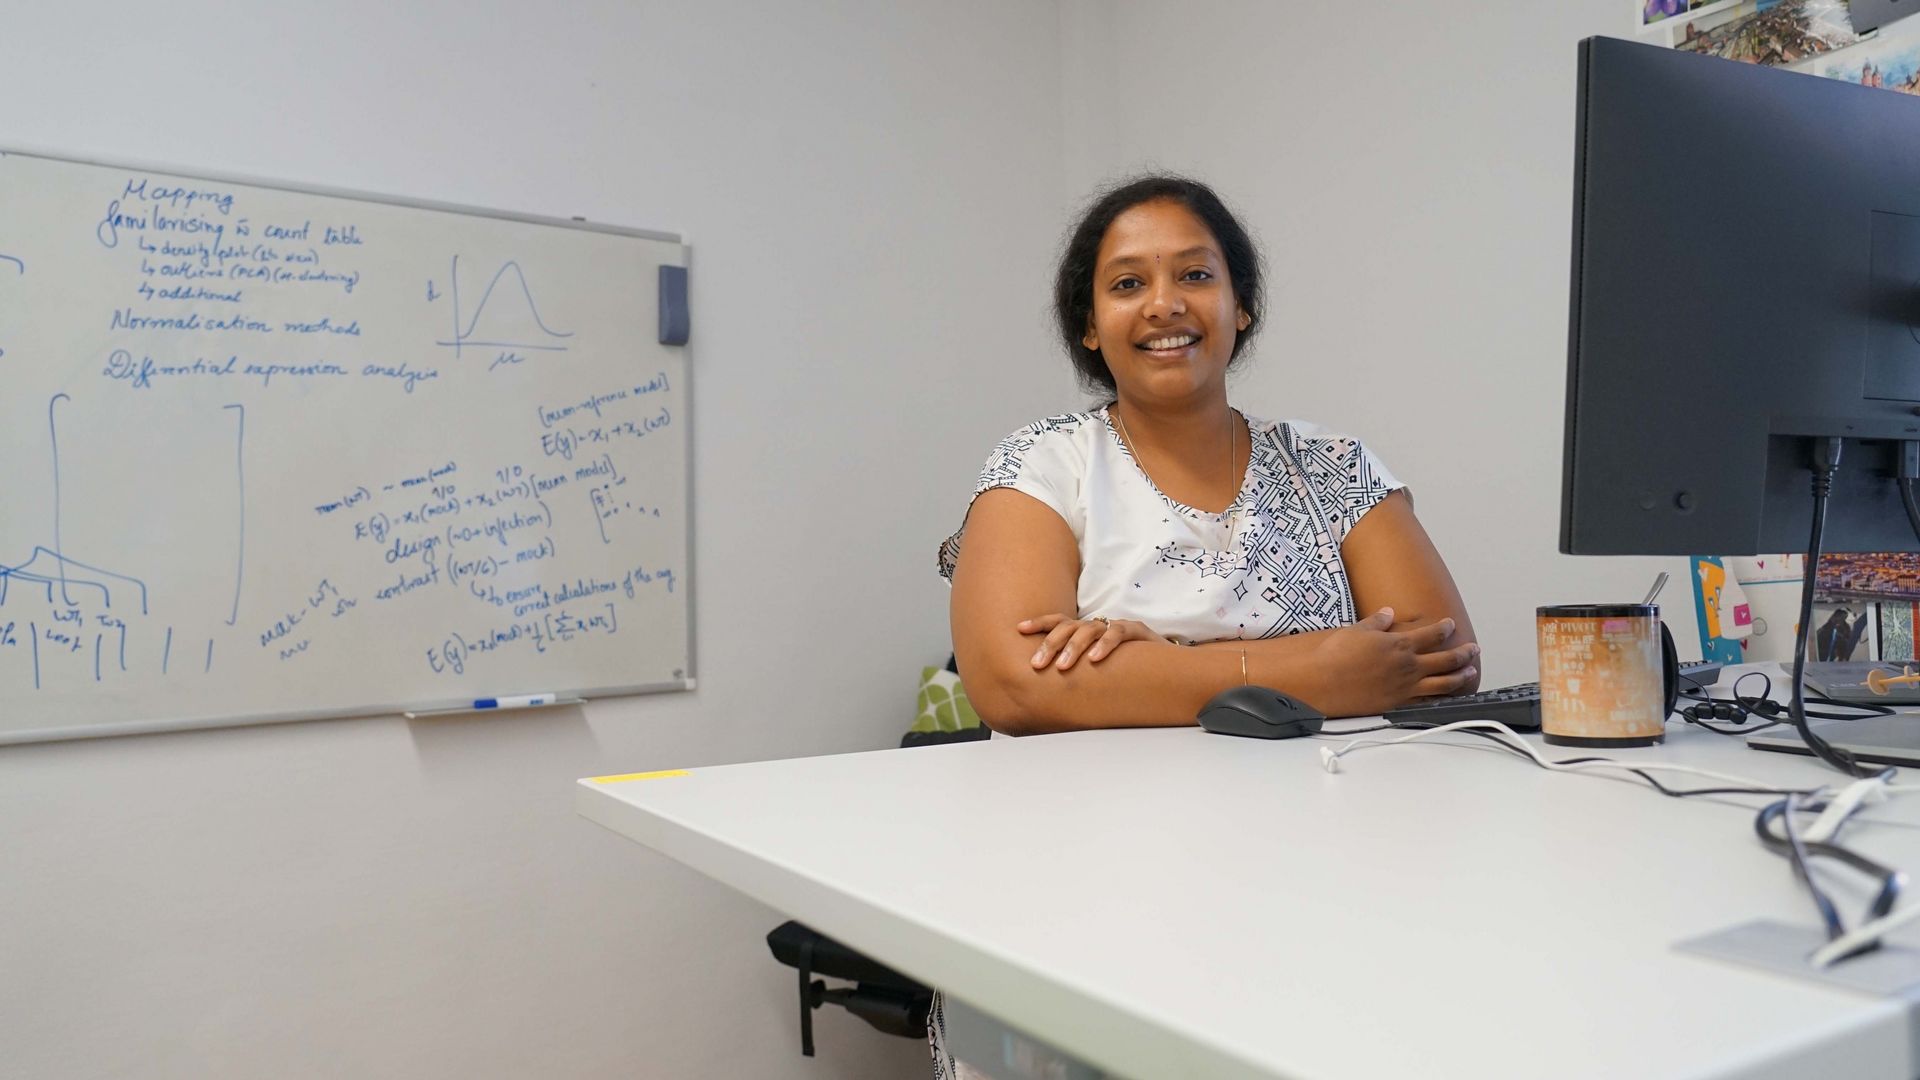 Shuba standing behind a white desk, with her arms relaxing on it in a crossed manner. She is smiling into the camera. On the desk, you can see her computer setup and a big coffee mug. A whiteboard with formulas, graphs and other notes is hanging at the back of the room. The wall next to her desk is decorated with a colorful variety of post cards.